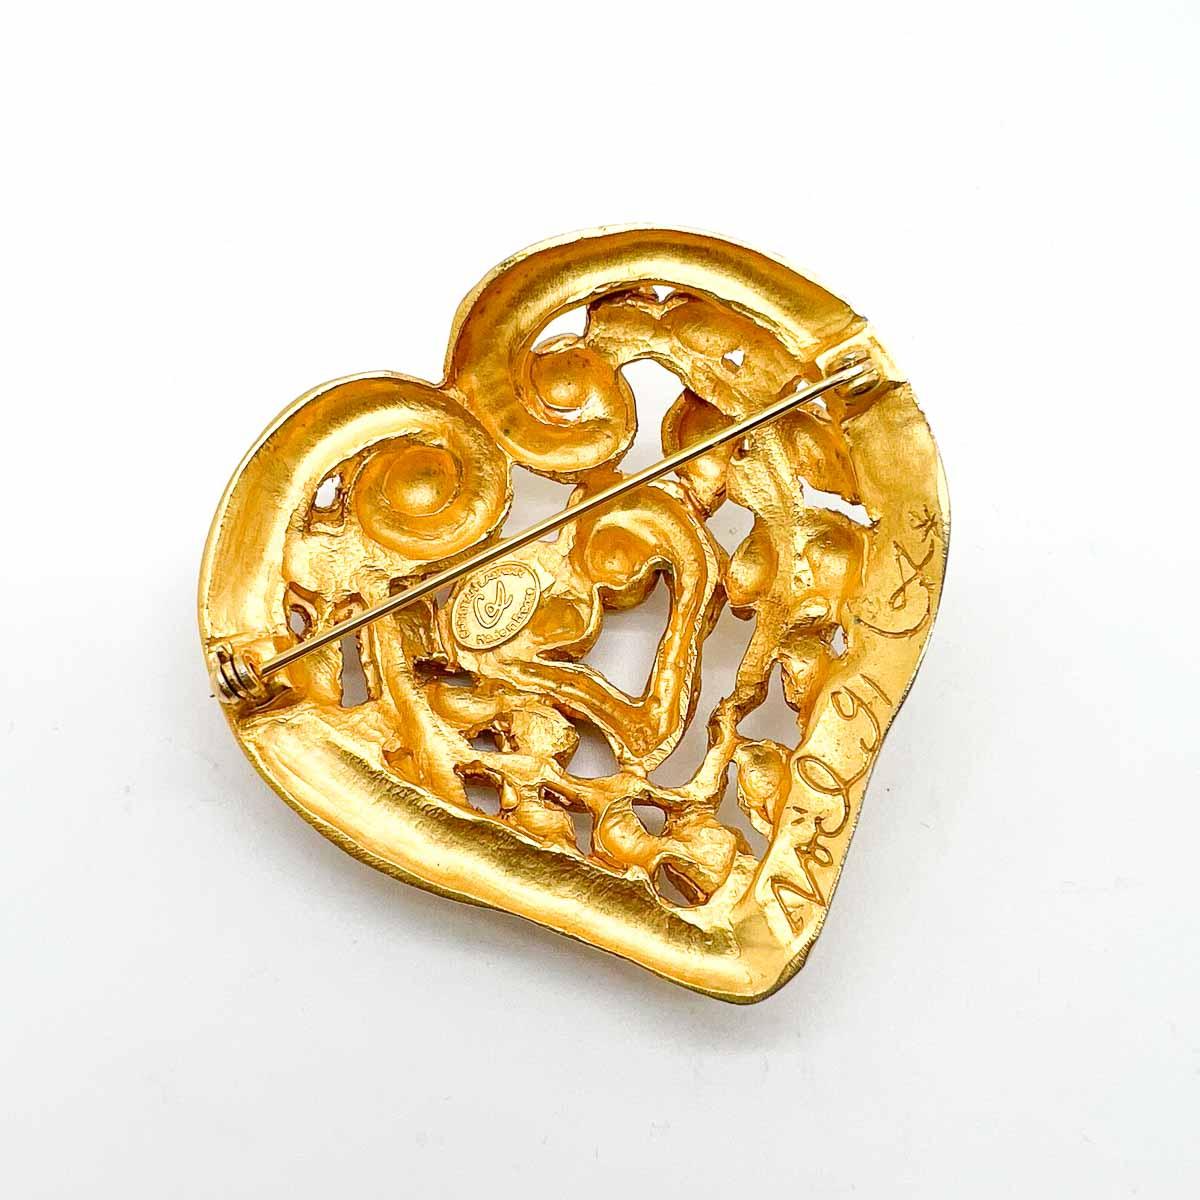 Vintage Christian Lacroix Statement Heart Limited Edition 'Noel 1991' Brooch For Sale 1